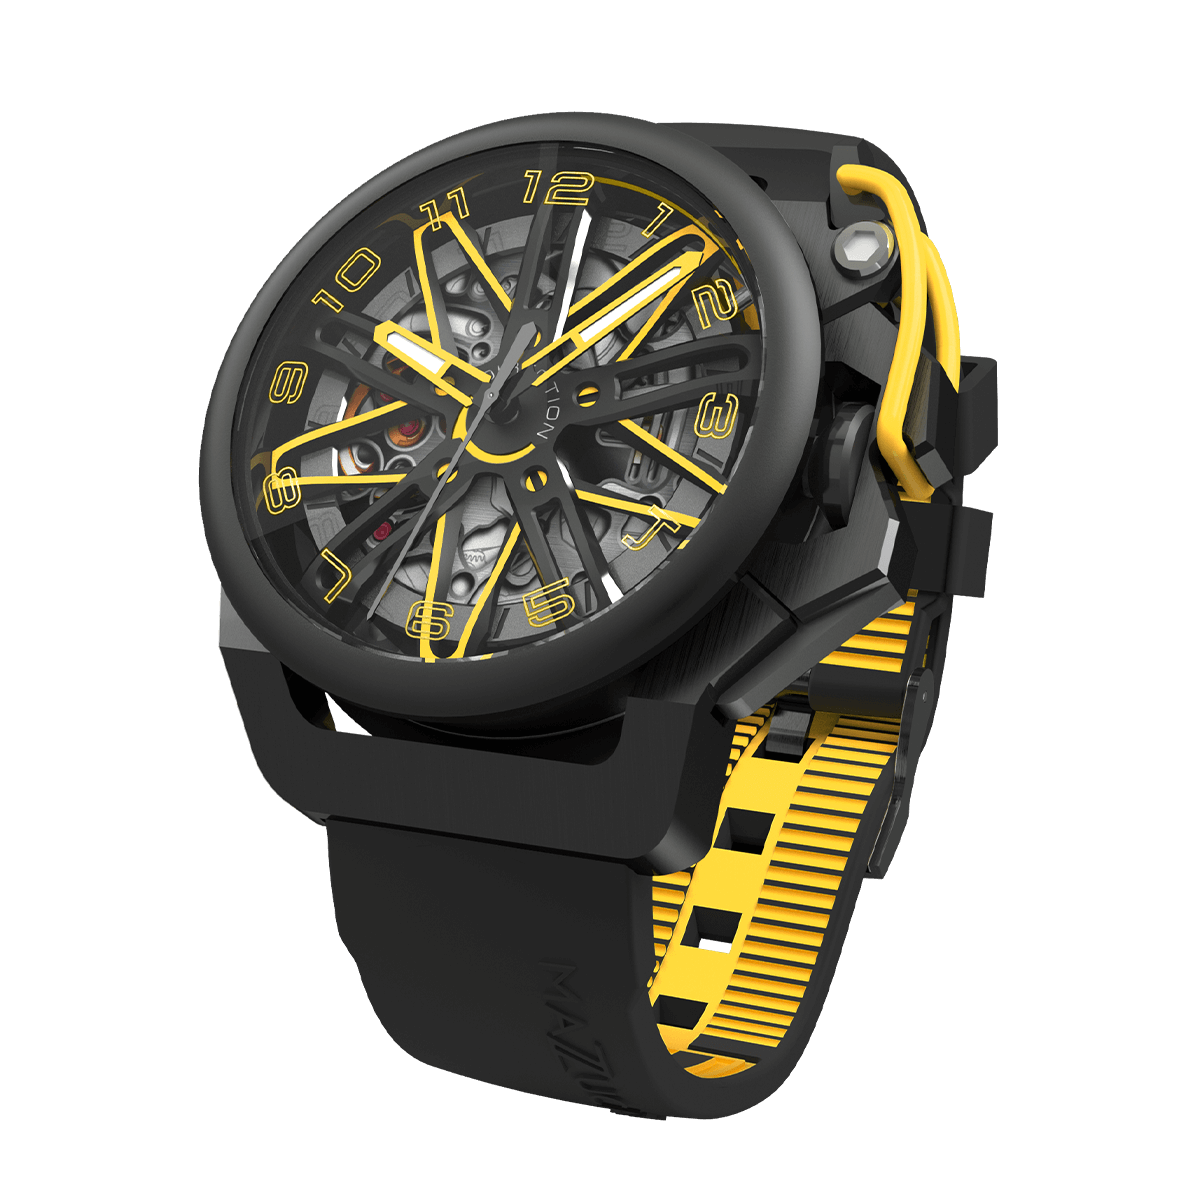 RIM GT Ø42mm in black and yellow | Mens Luxury Watches | Italian Designed Watches